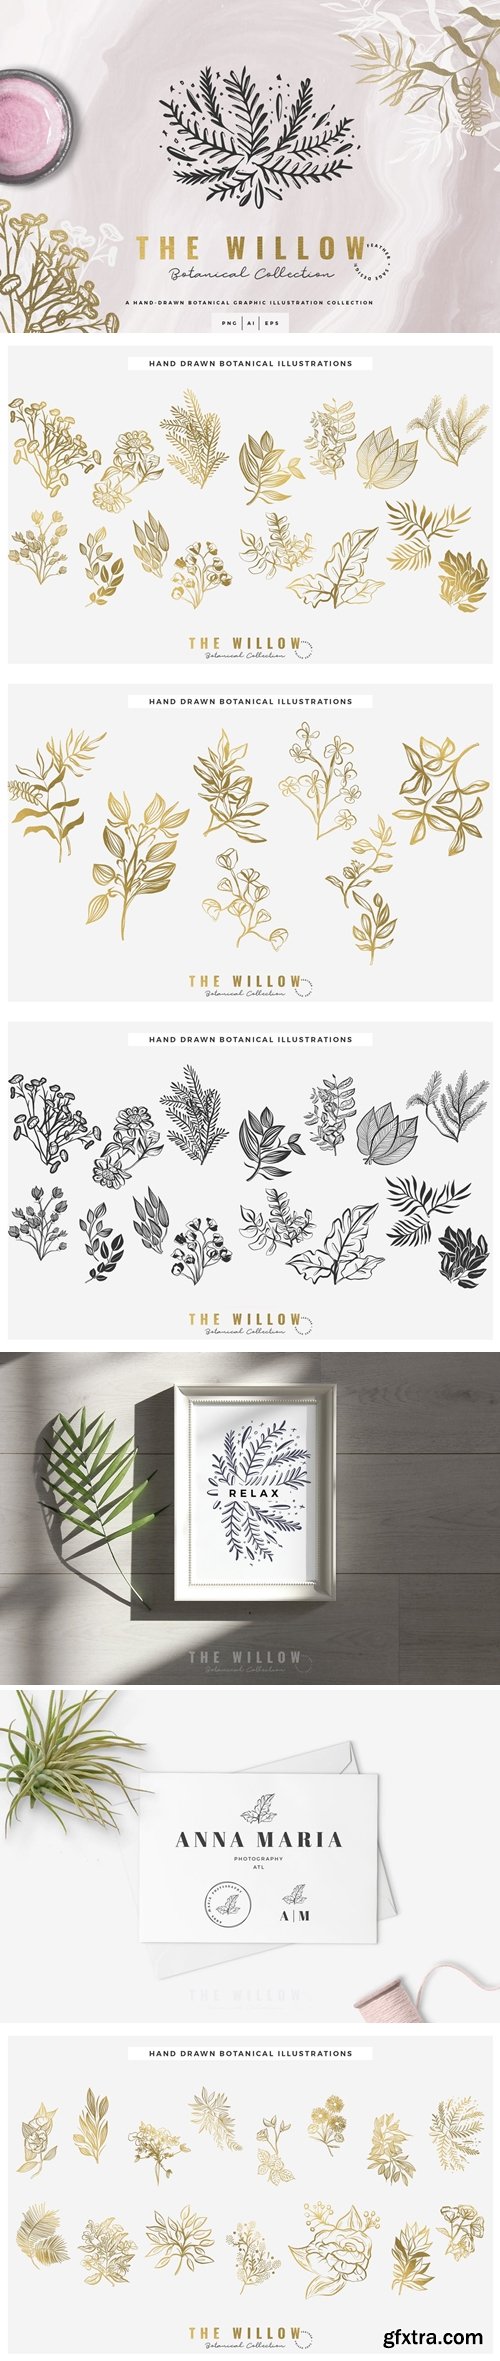 The Willow Graphic Collection